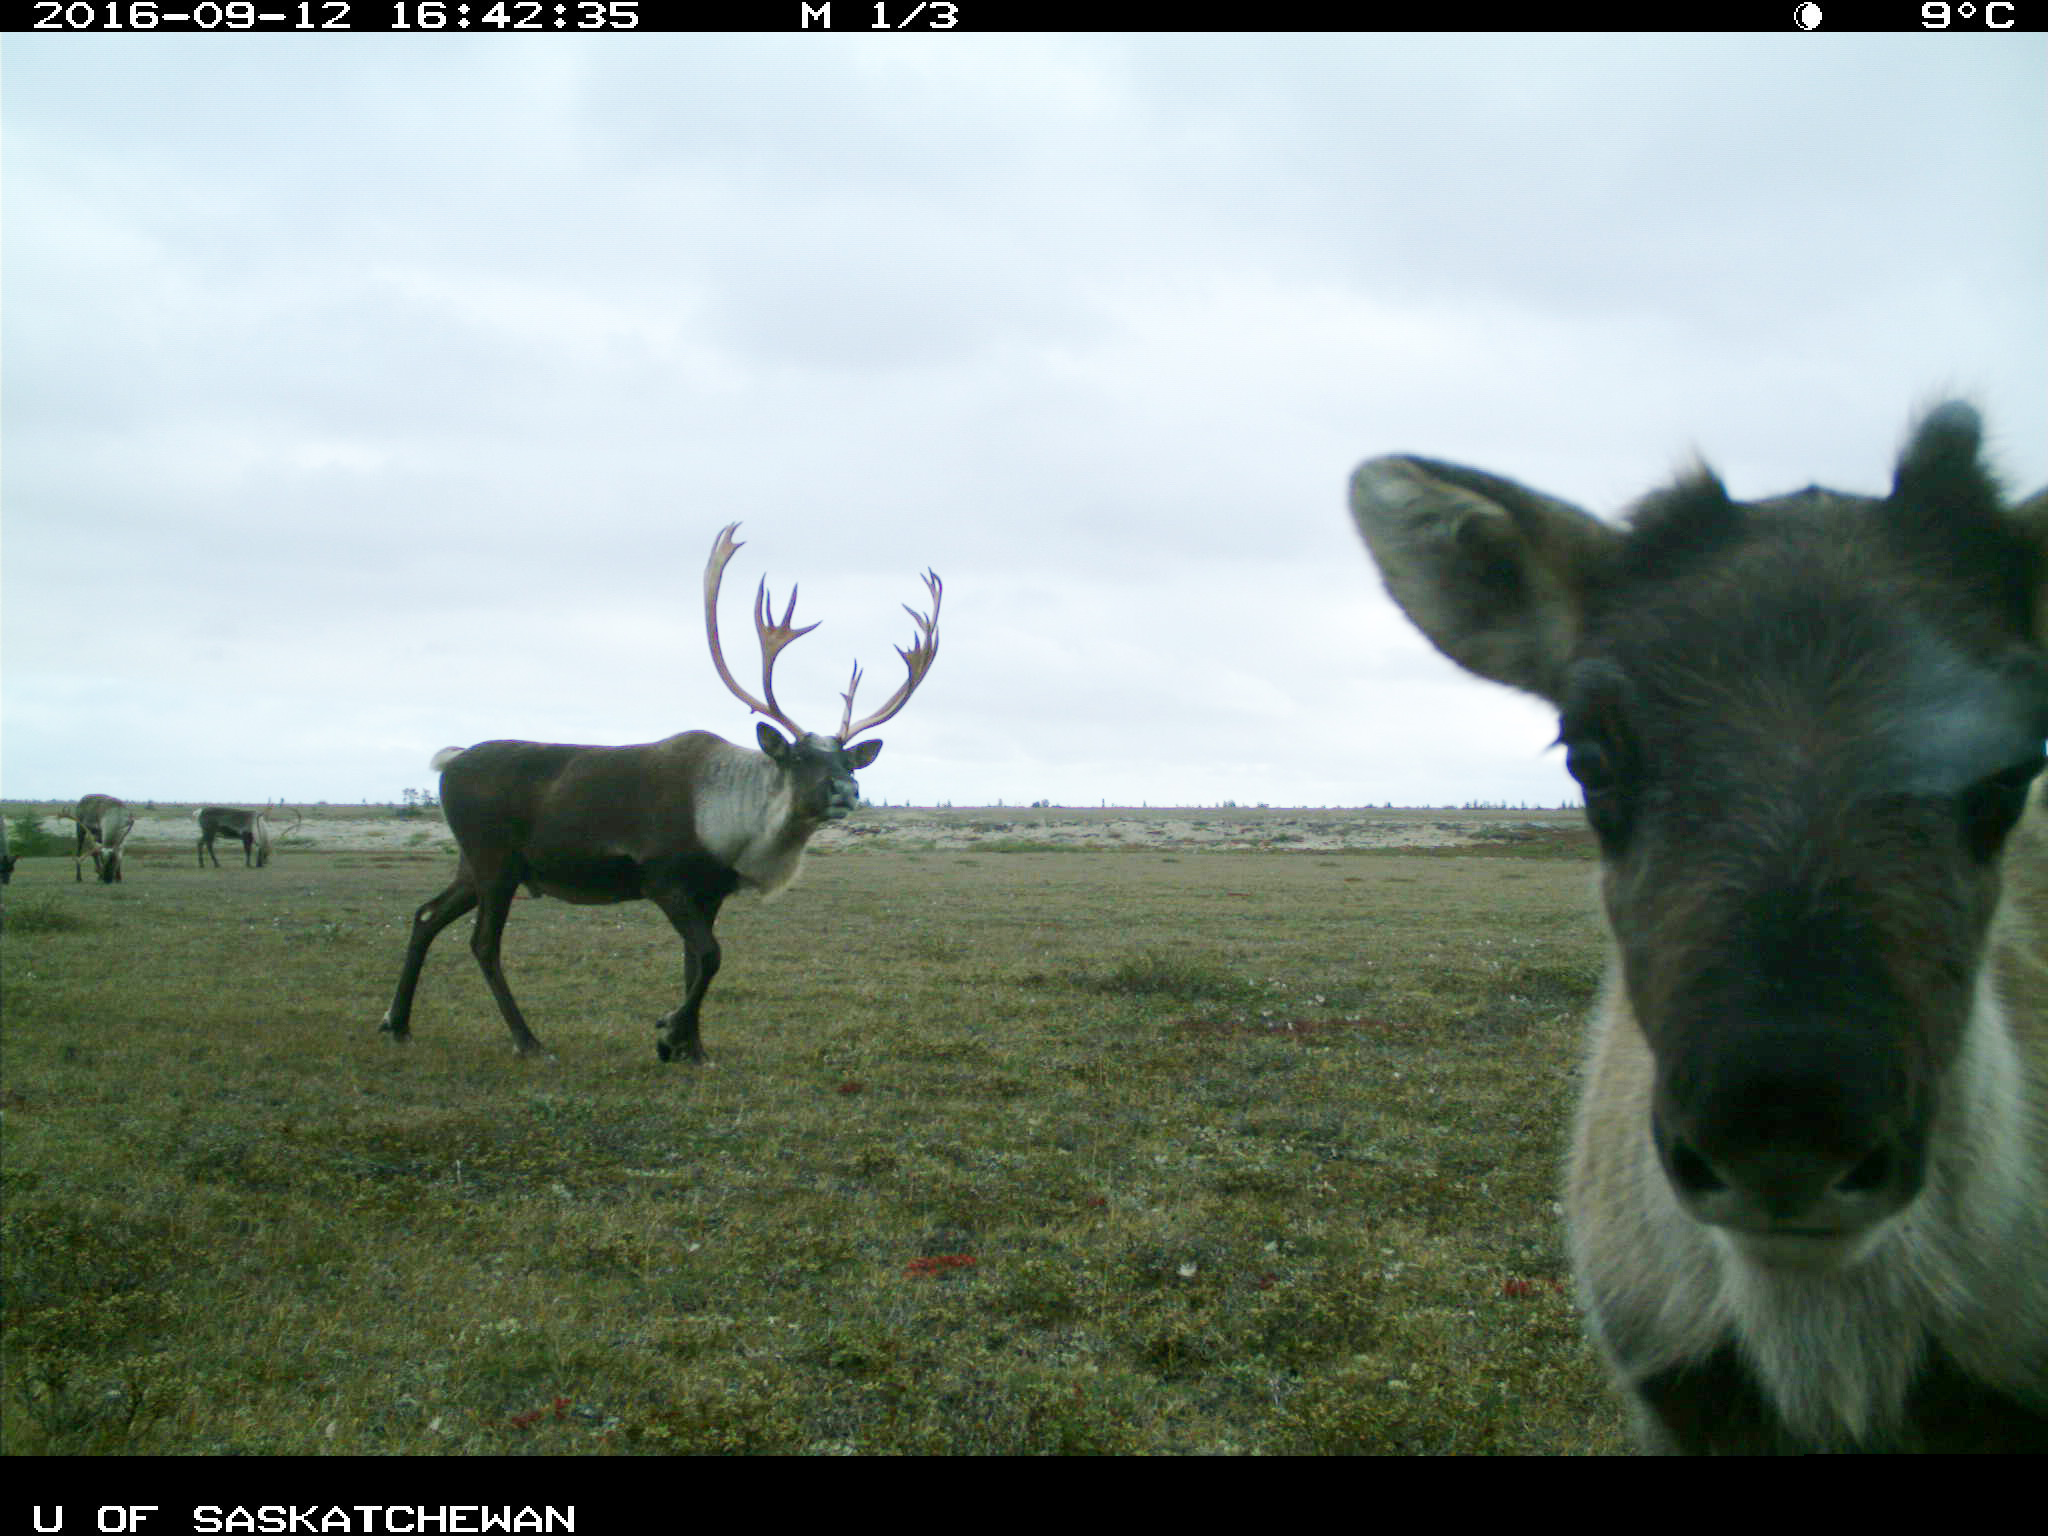 A young caribou looks at the camera as a male walks past in the distance